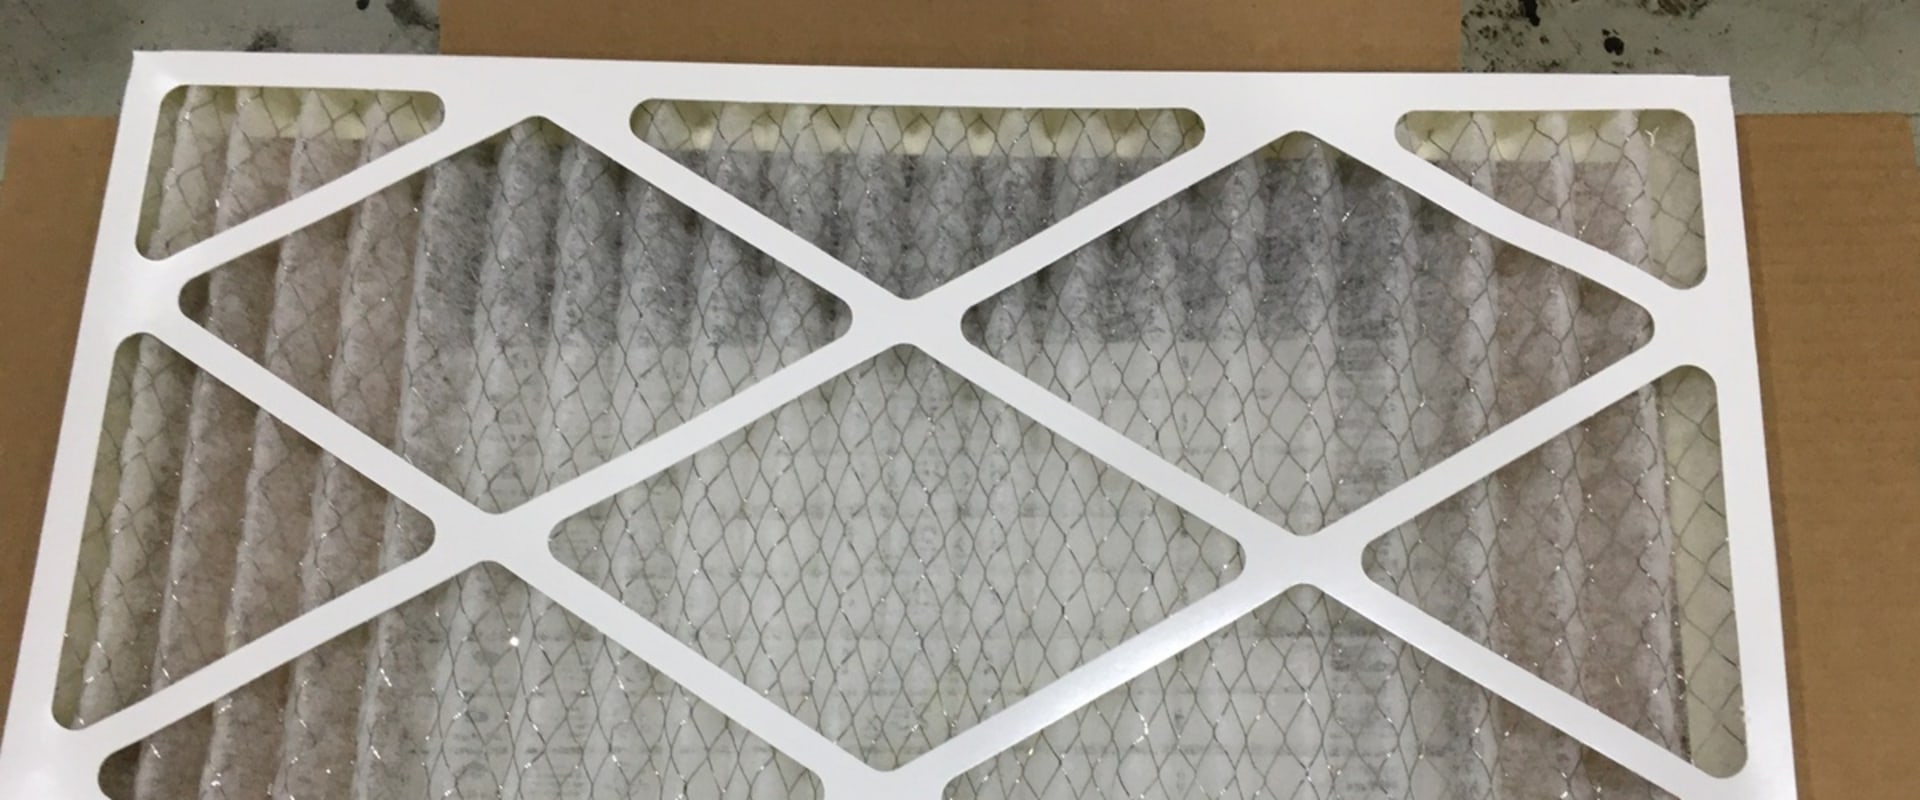 What is the Size of an Air Filter 16x25x1?